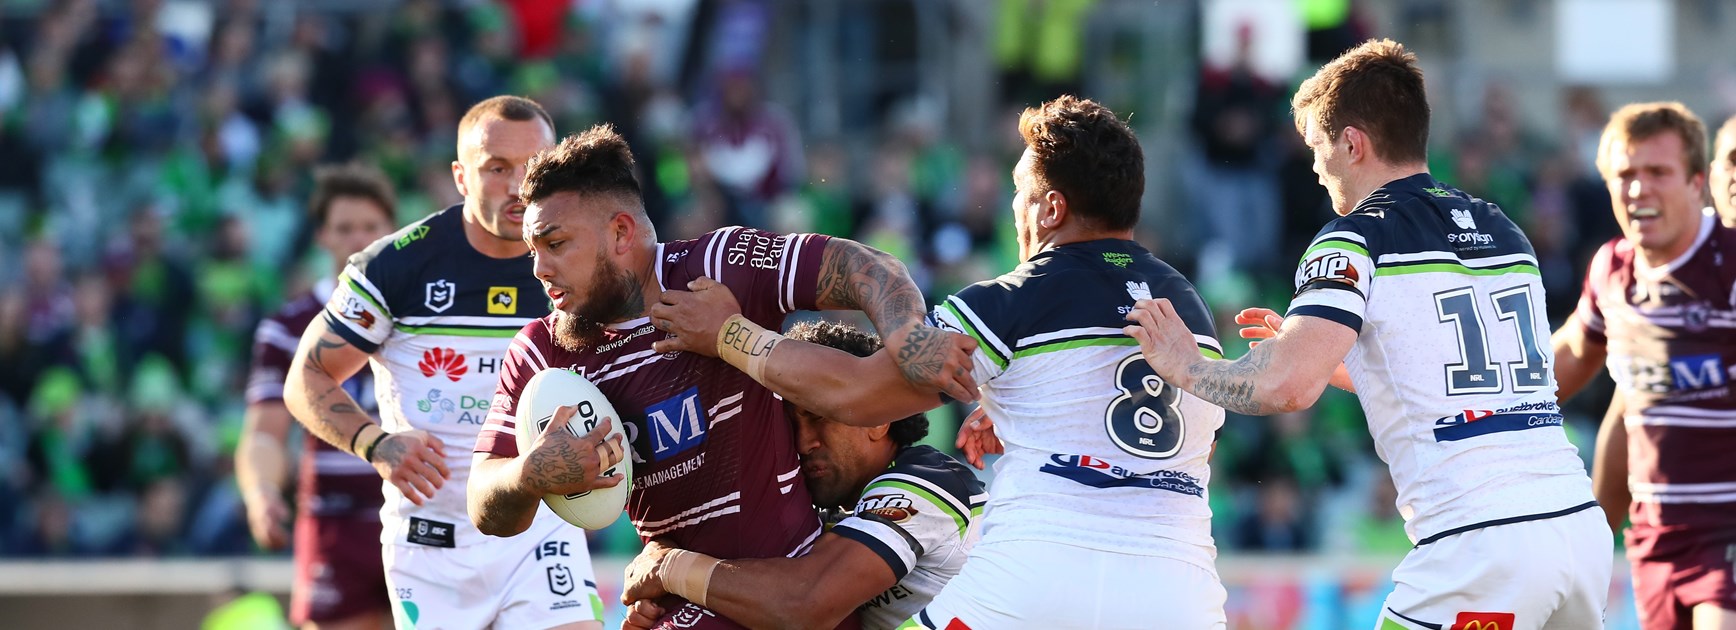 Sea Eagles beat Raiders 18-14 in a thriller